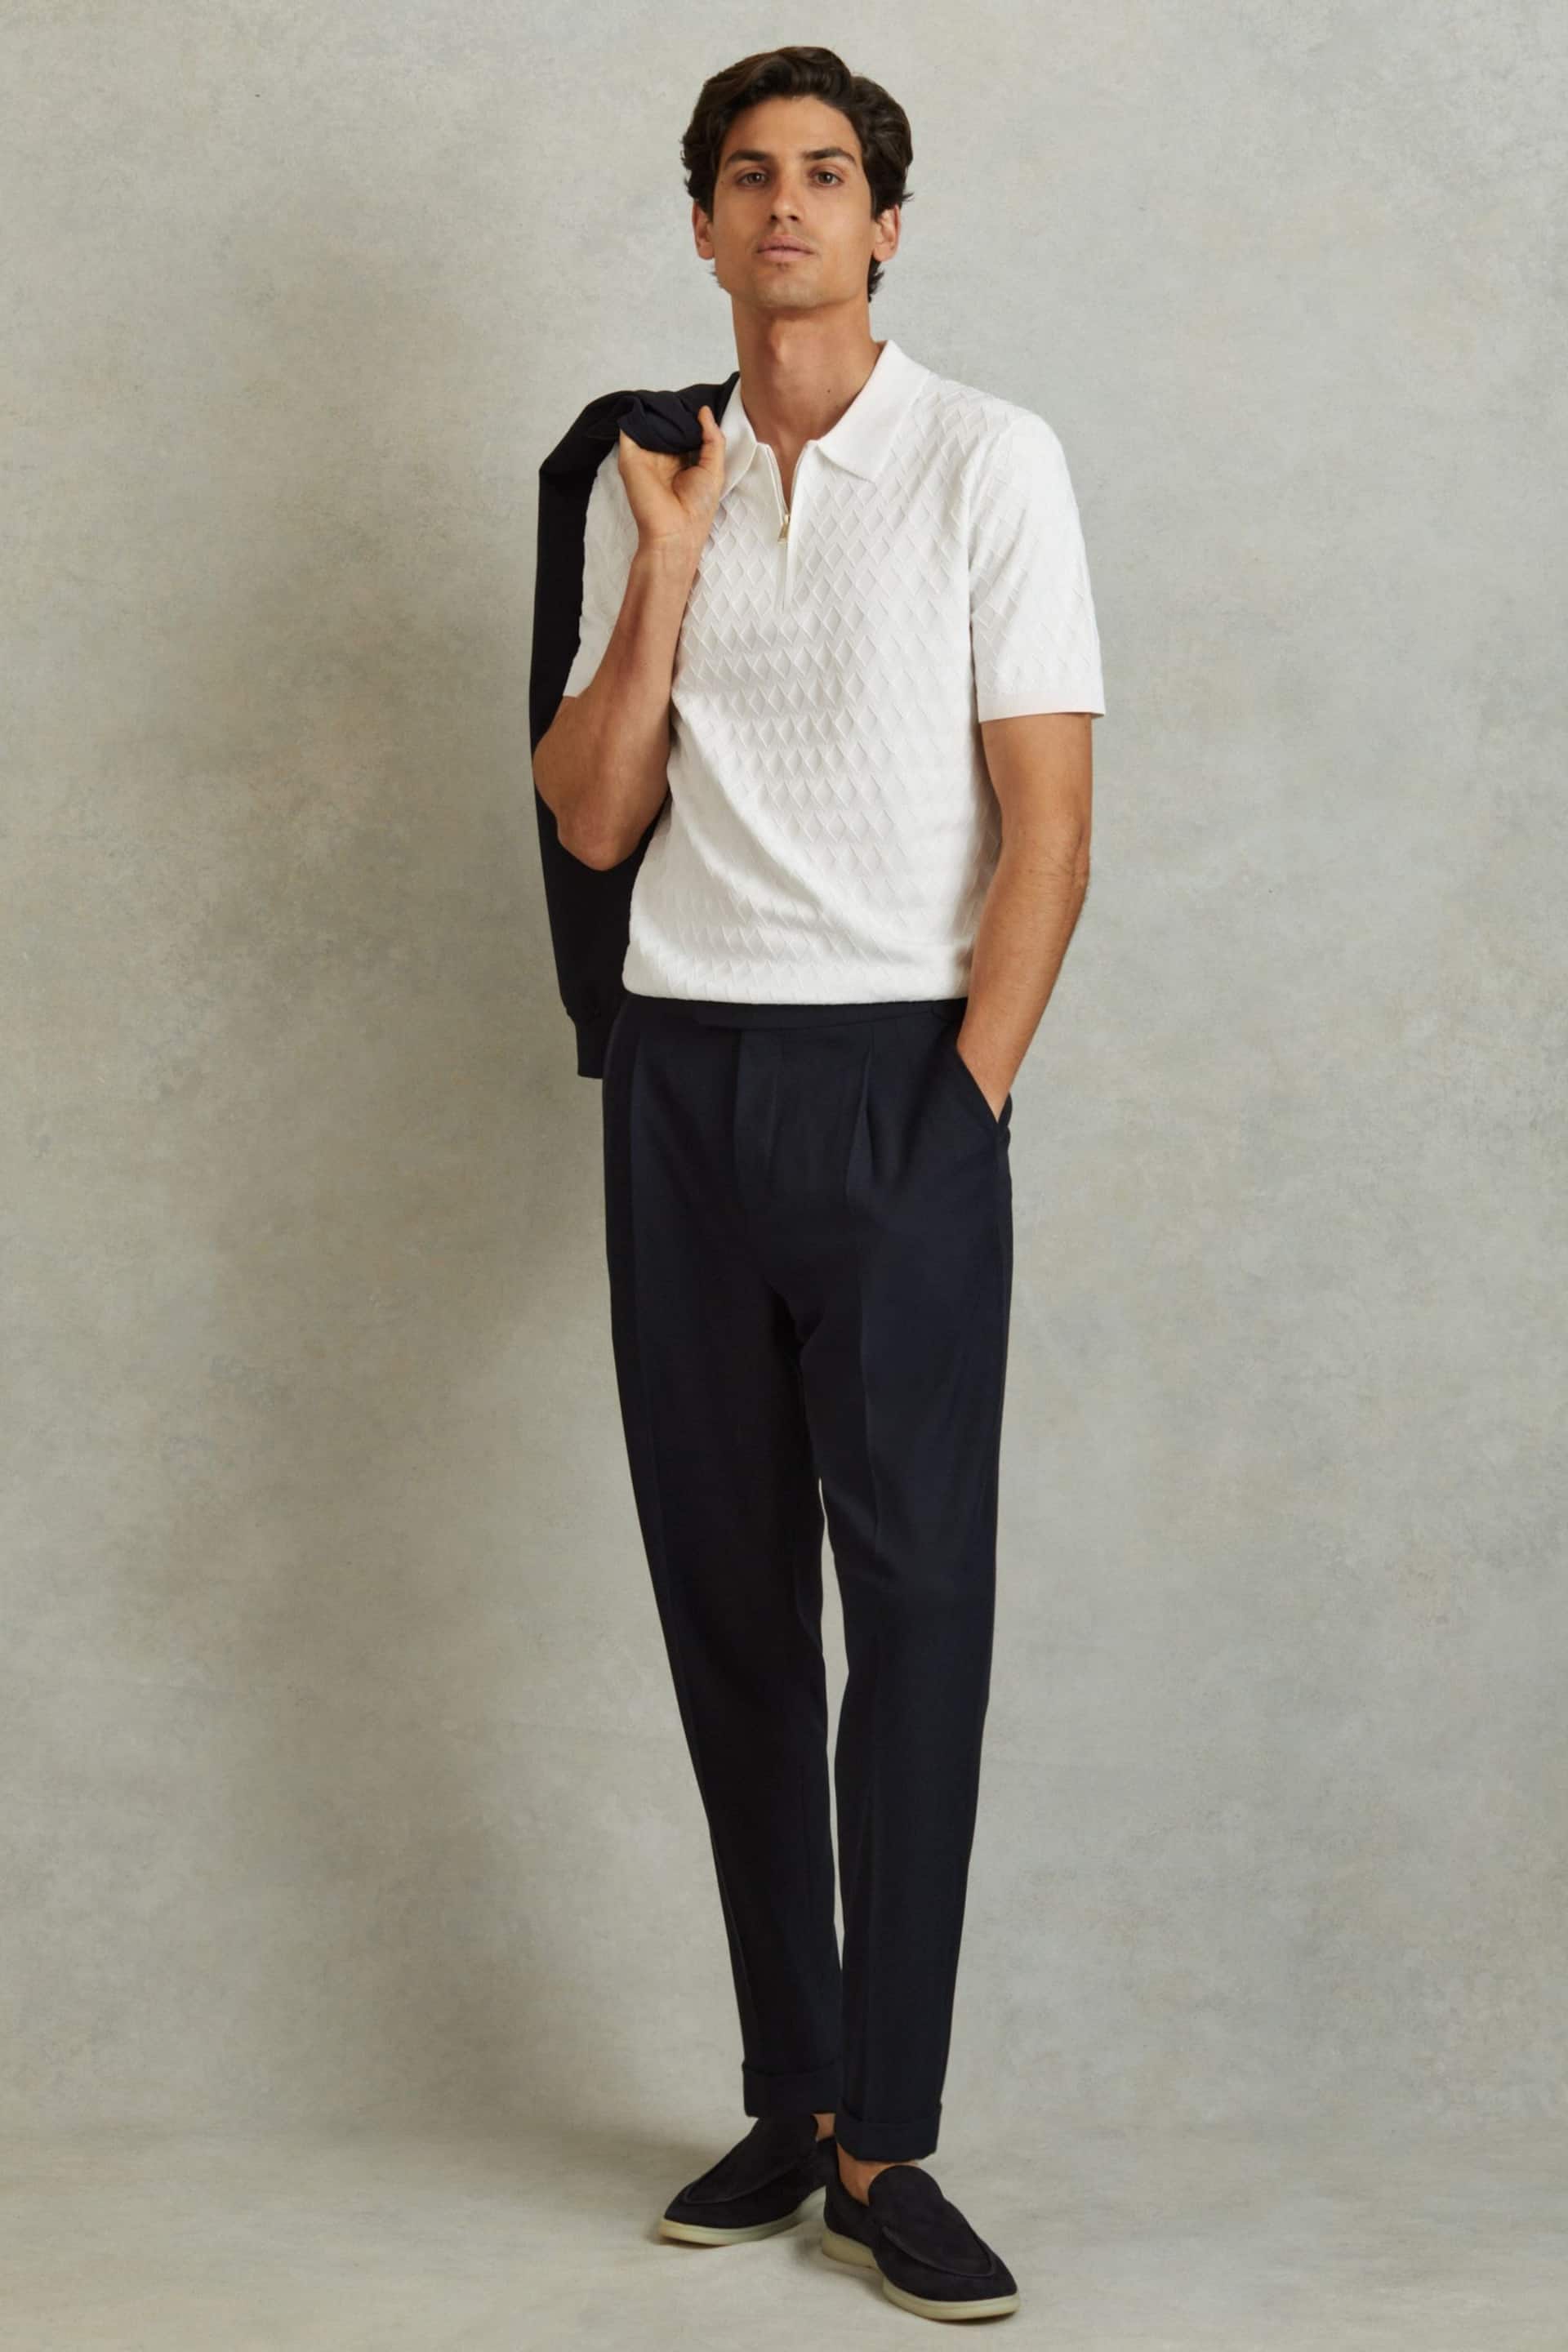 Reiss White Rizzo Half-Zip Knitted Polo Shirt - Image 1 of 5